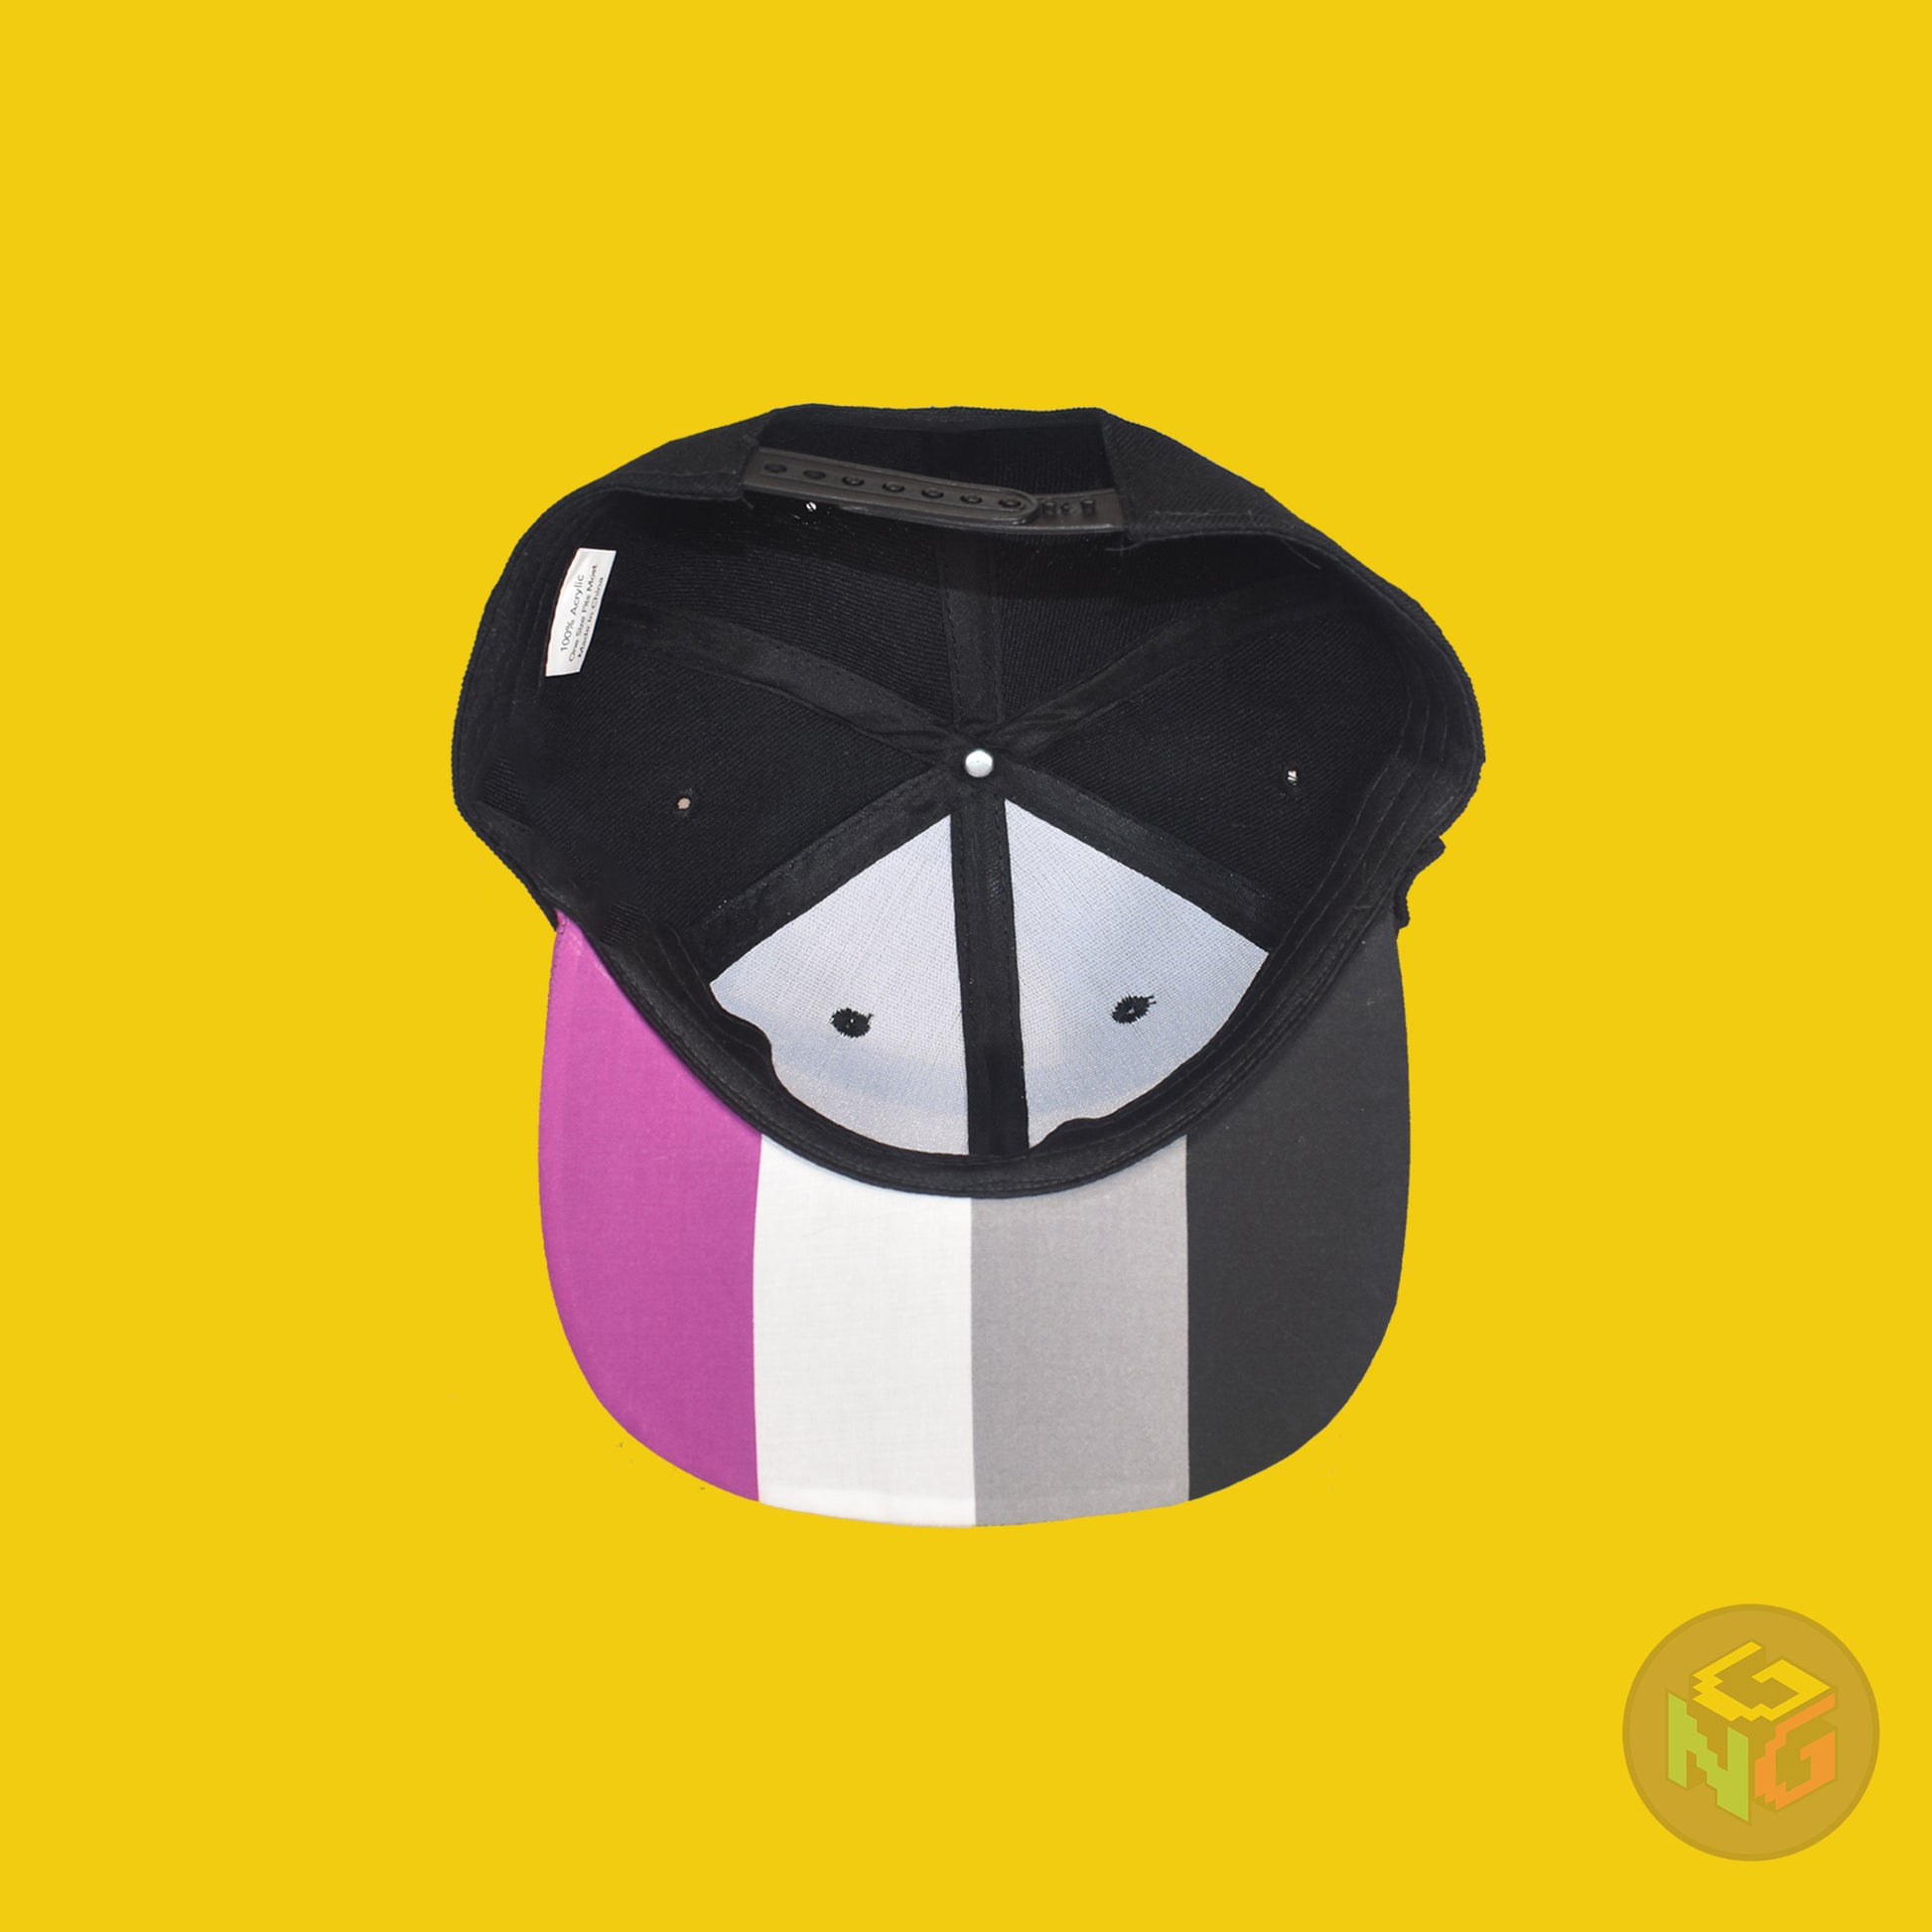 Black flat bill snapback hat. The brim has the asexual pride flag on both sides and the front of the hat has the word “ACE” in white, purple, and grey. Underside view